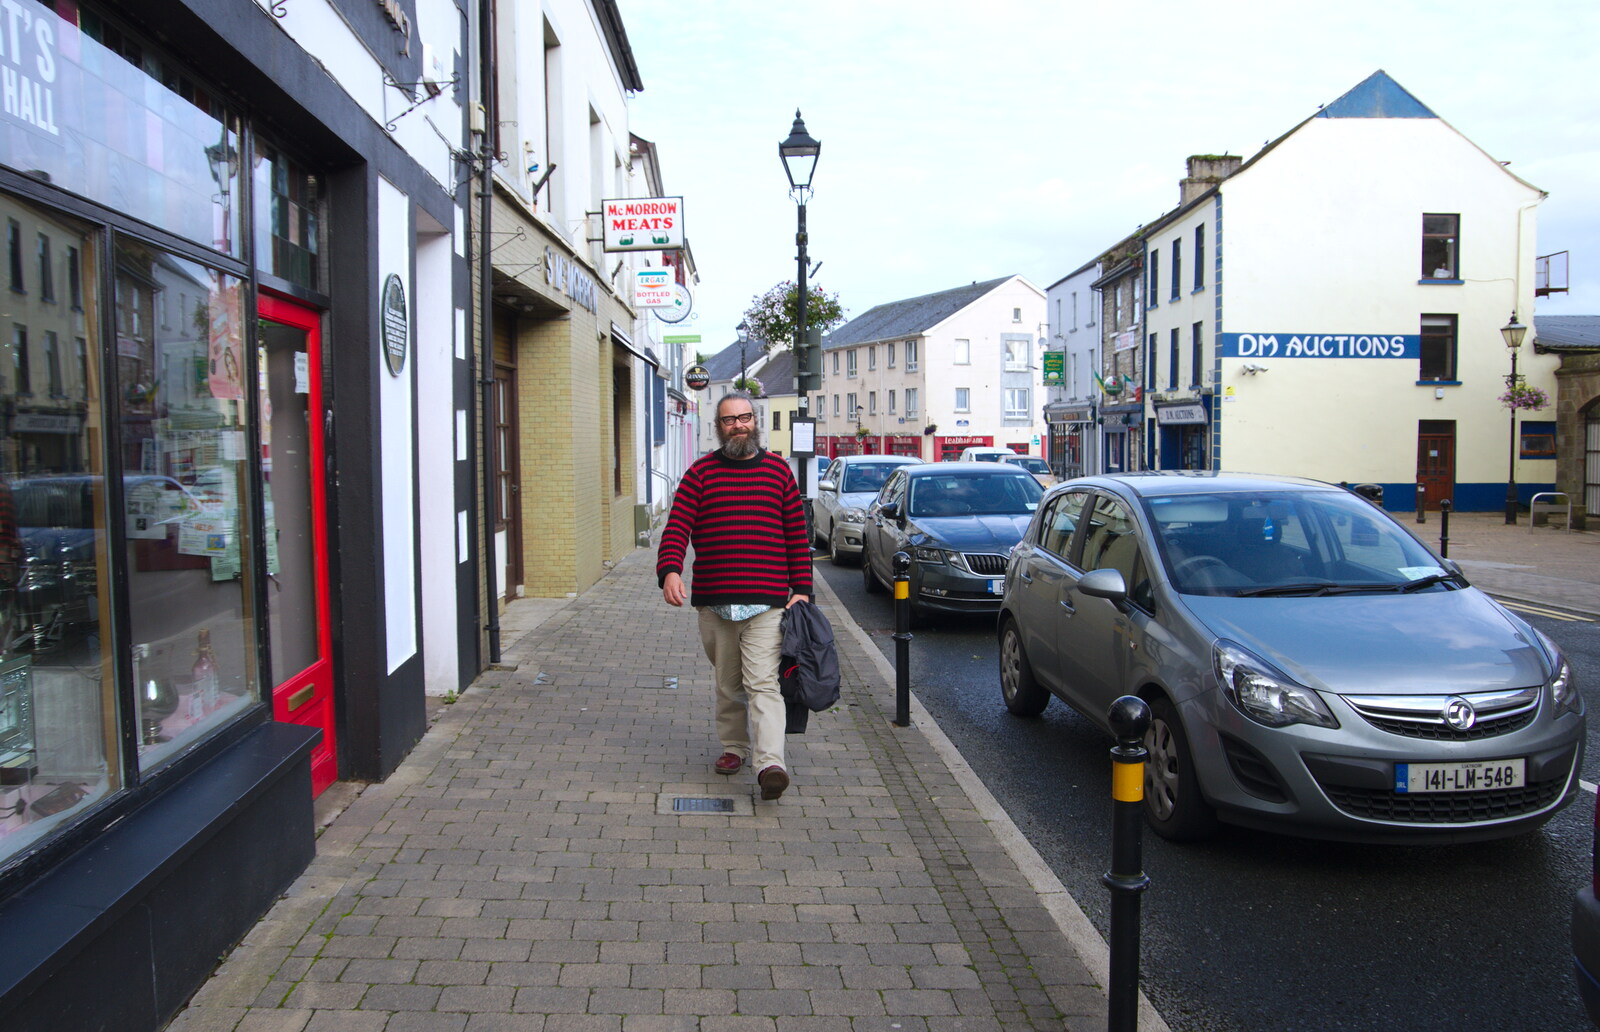 We see Noddy walking down Main Street from Florence Court and a Postcard from Sligo, Fermanagh and Sligo, Ireland - 21st August 2019